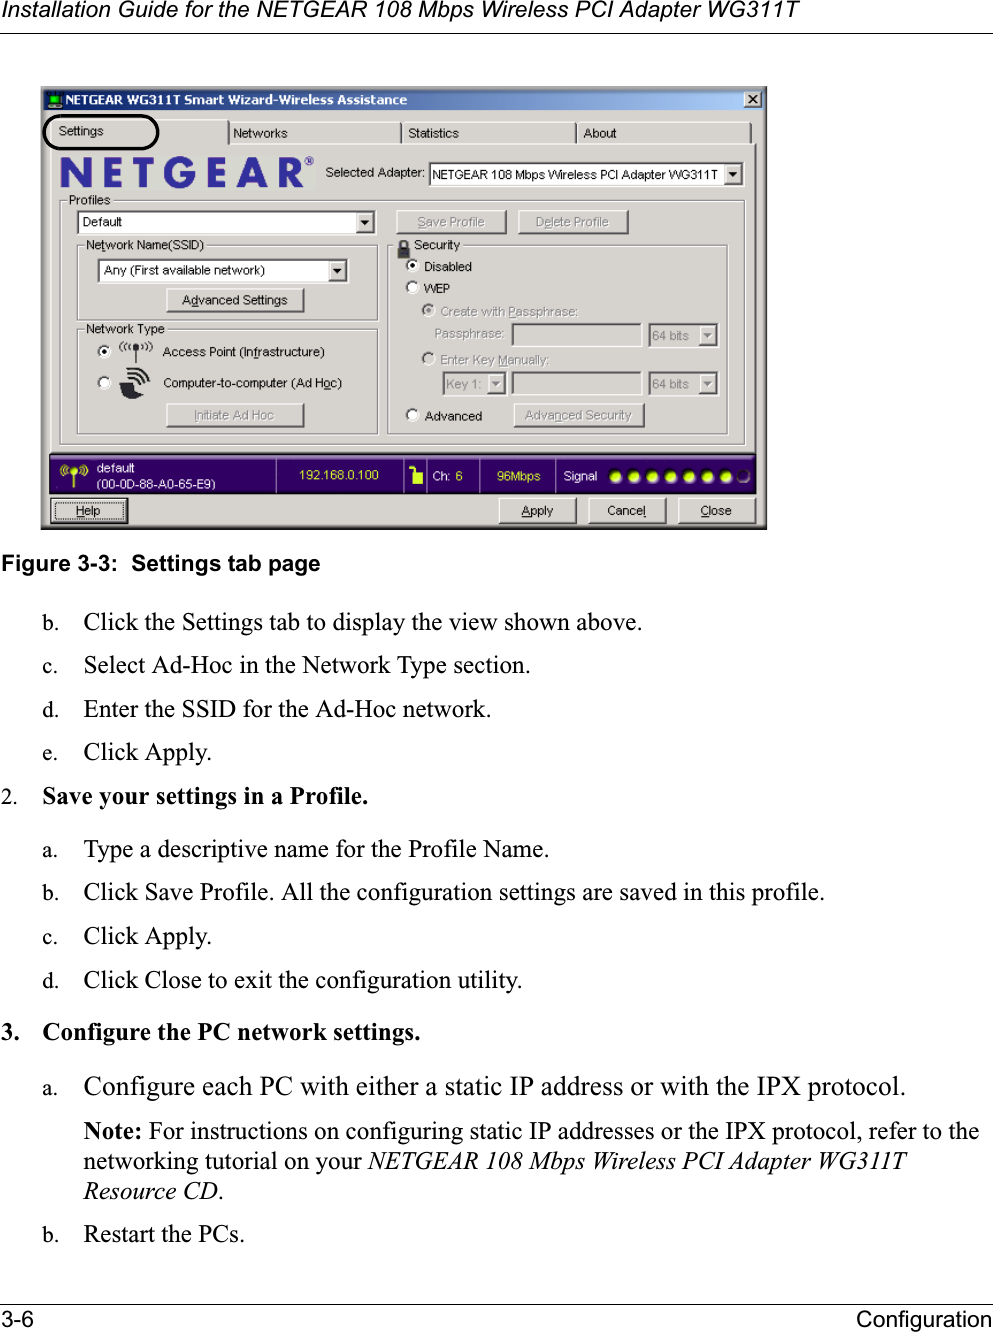 Installation Guide for the NETGEAR 108 Mbps Wireless PCI Adapter WG311T3-6 ConfigurationFigure 3-3:  Settings tab pageb. Click the Settings tab to display the view shown above. c. Select Ad-Hoc in the Network Type section.d. Enter the SSID for the Ad-Hoc network.e. Click Apply.2. Save your settings in a Profile. a. Type a descriptive name for the Profile Name. b. Click Save Profile. All the configuration settings are saved in this profile. c. Click Apply. d. Click Close to exit the configuration utility.3. Configure the PC network settings. a. Configure each PC with either a static IP address or with the IPX protocol.Note: For instructions on configuring static IP addresses or the IPX protocol, refer to the networking tutorial on your NETGEAR 108 Mbps Wireless PCI Adapter WG311T Resource CD.b. Restart the PCs. 